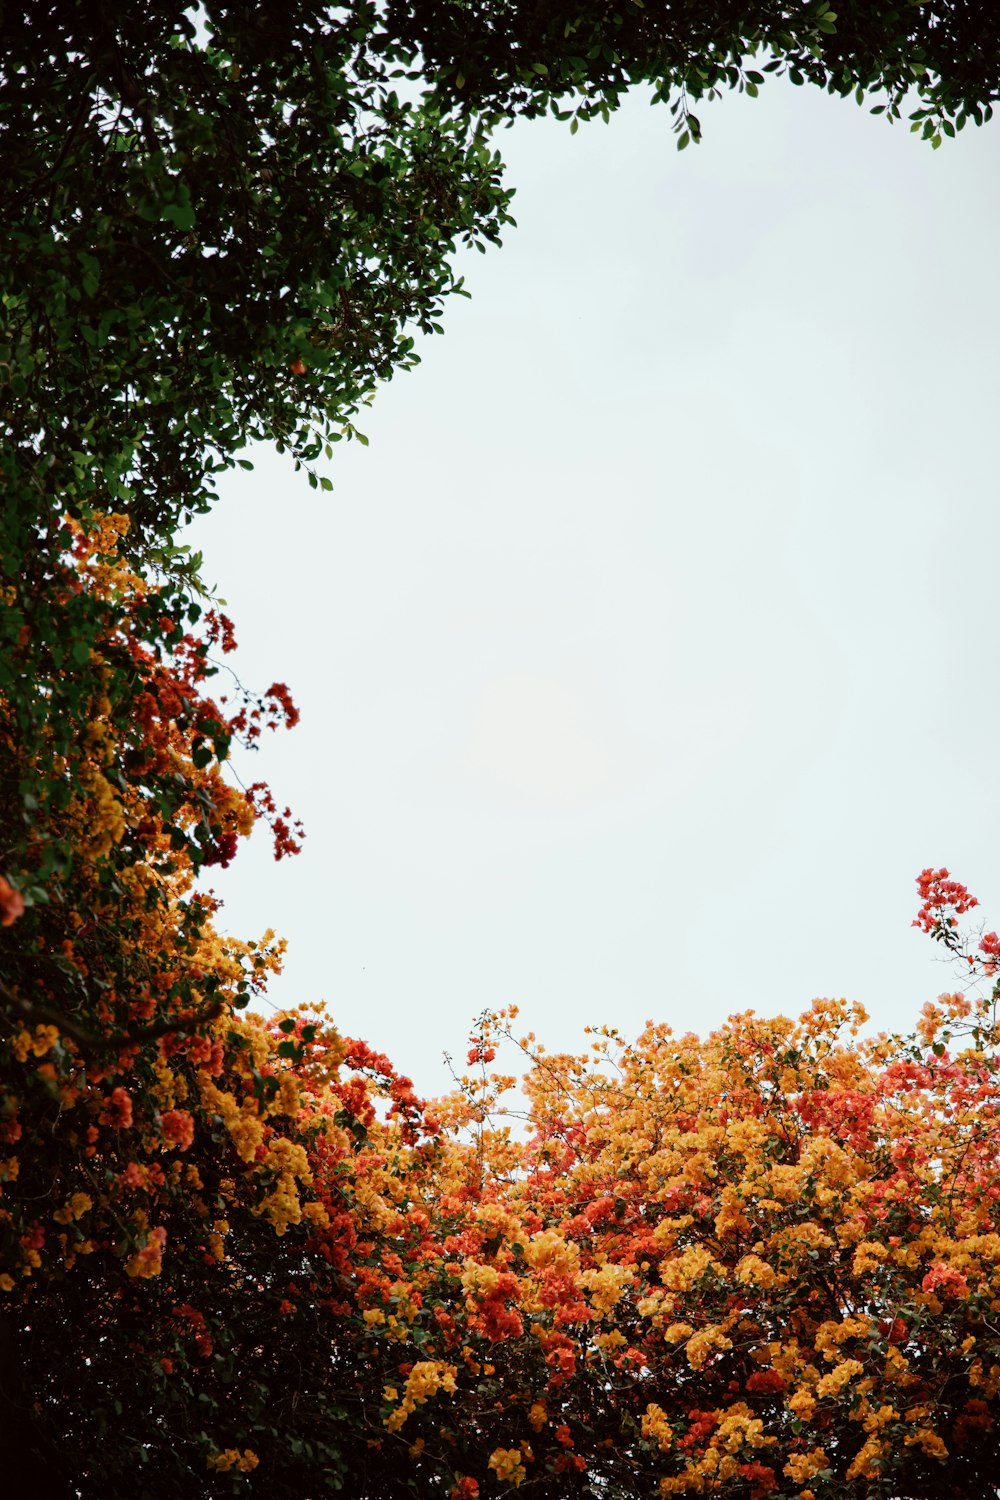 a picture of a tree with yellow and red flowers